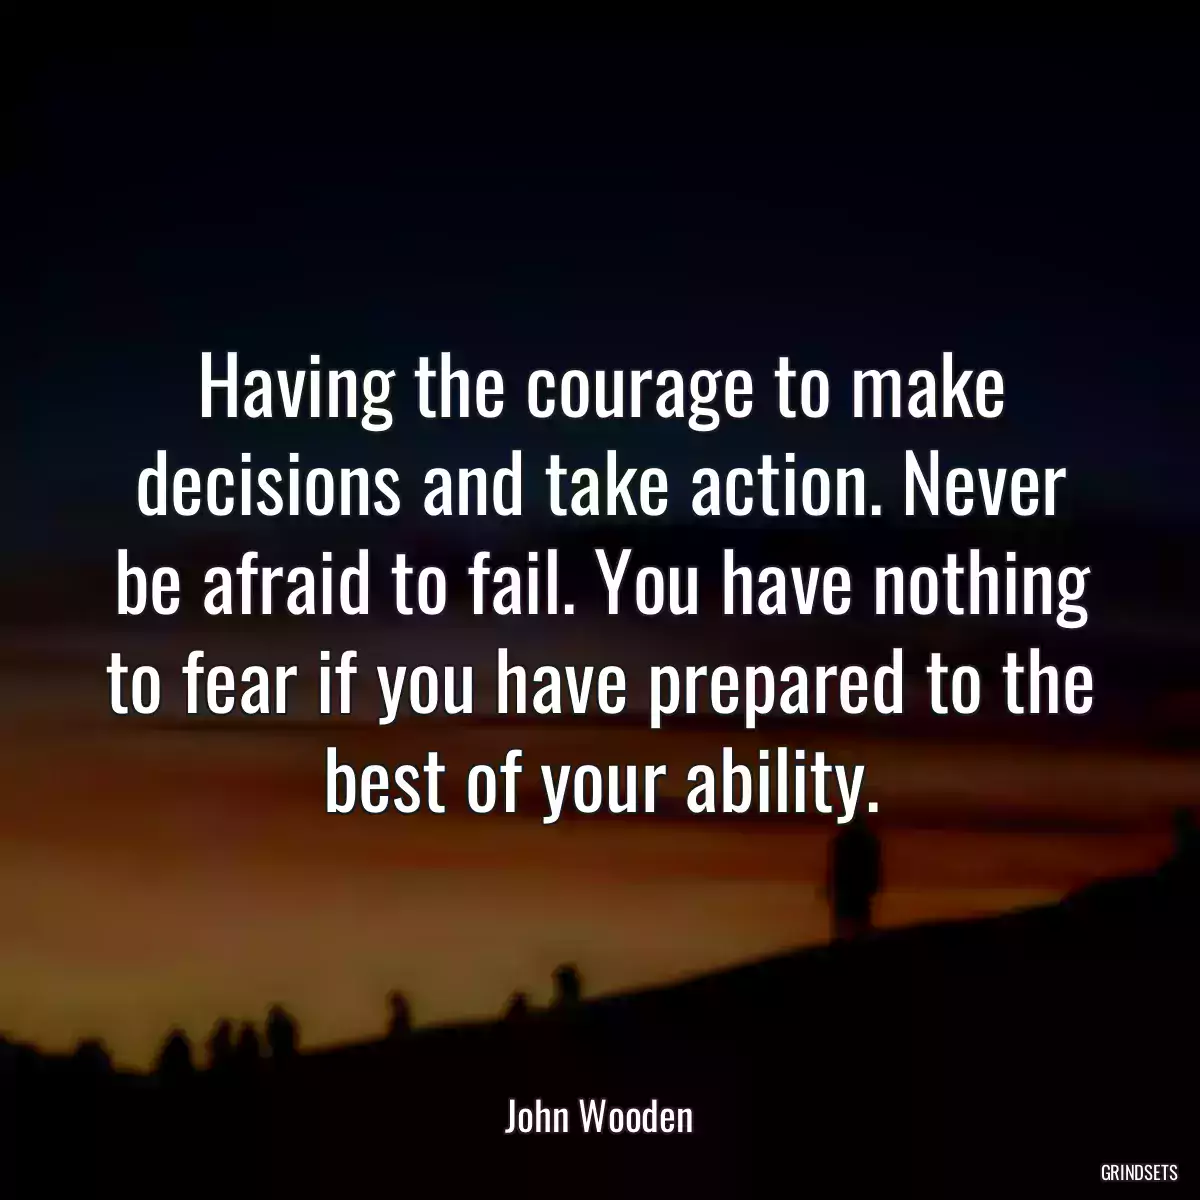 Having the courage to make decisions and take action. Never be afraid to fail. You have nothing to fear if you have prepared to the best of your ability.